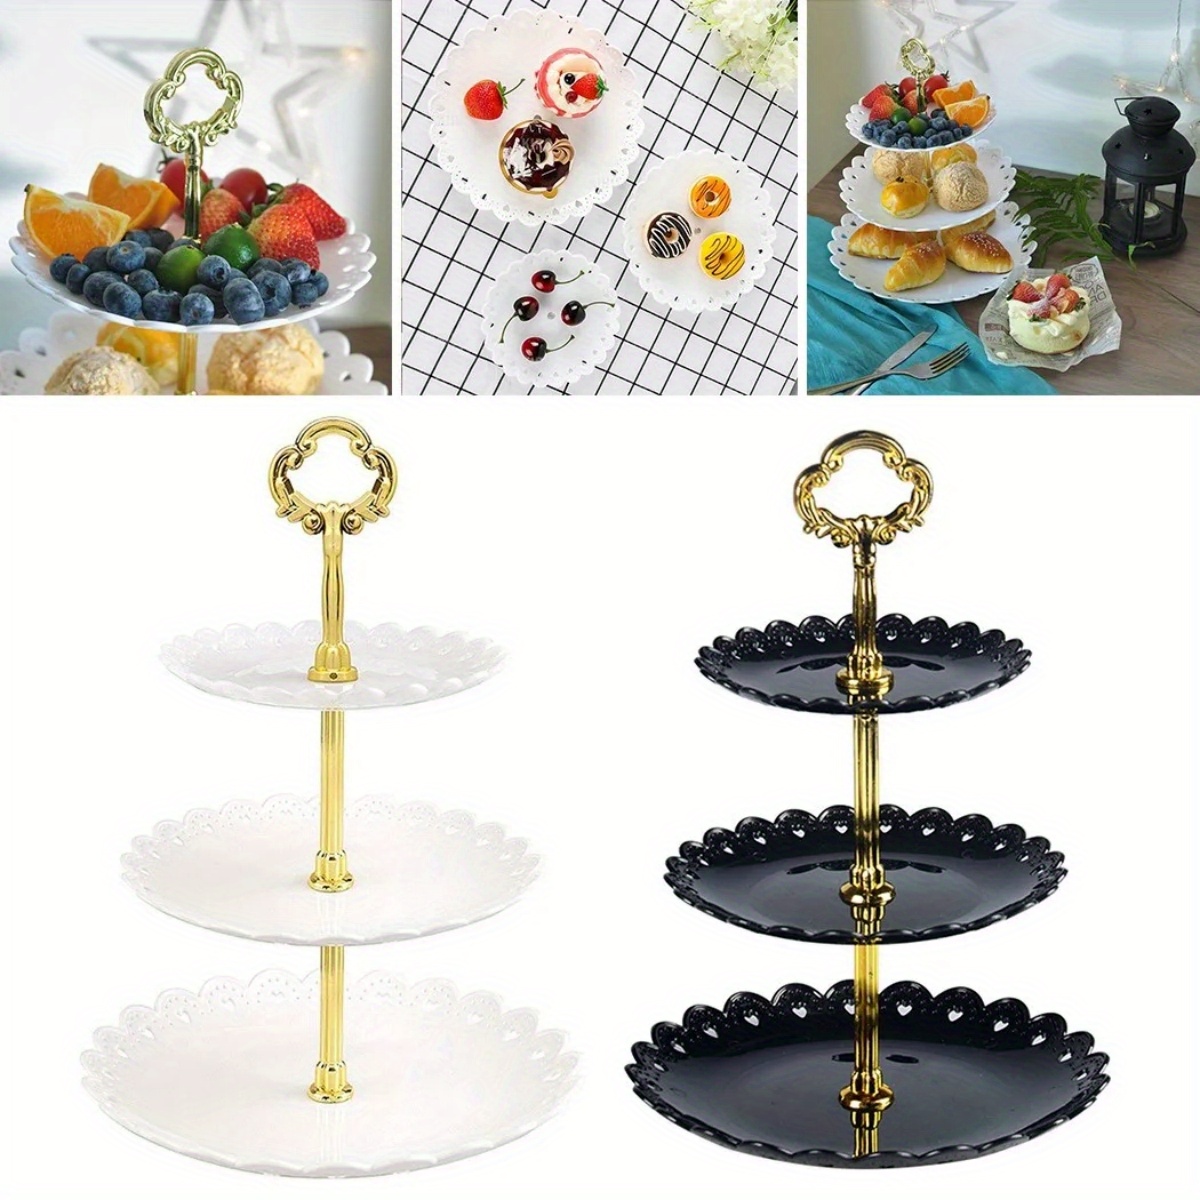 

3-tier Plastic Cake Stand, Round Serving Tray For Dessert Display, Multi-layer Fruit Plate For Birthday, Party, Wedding